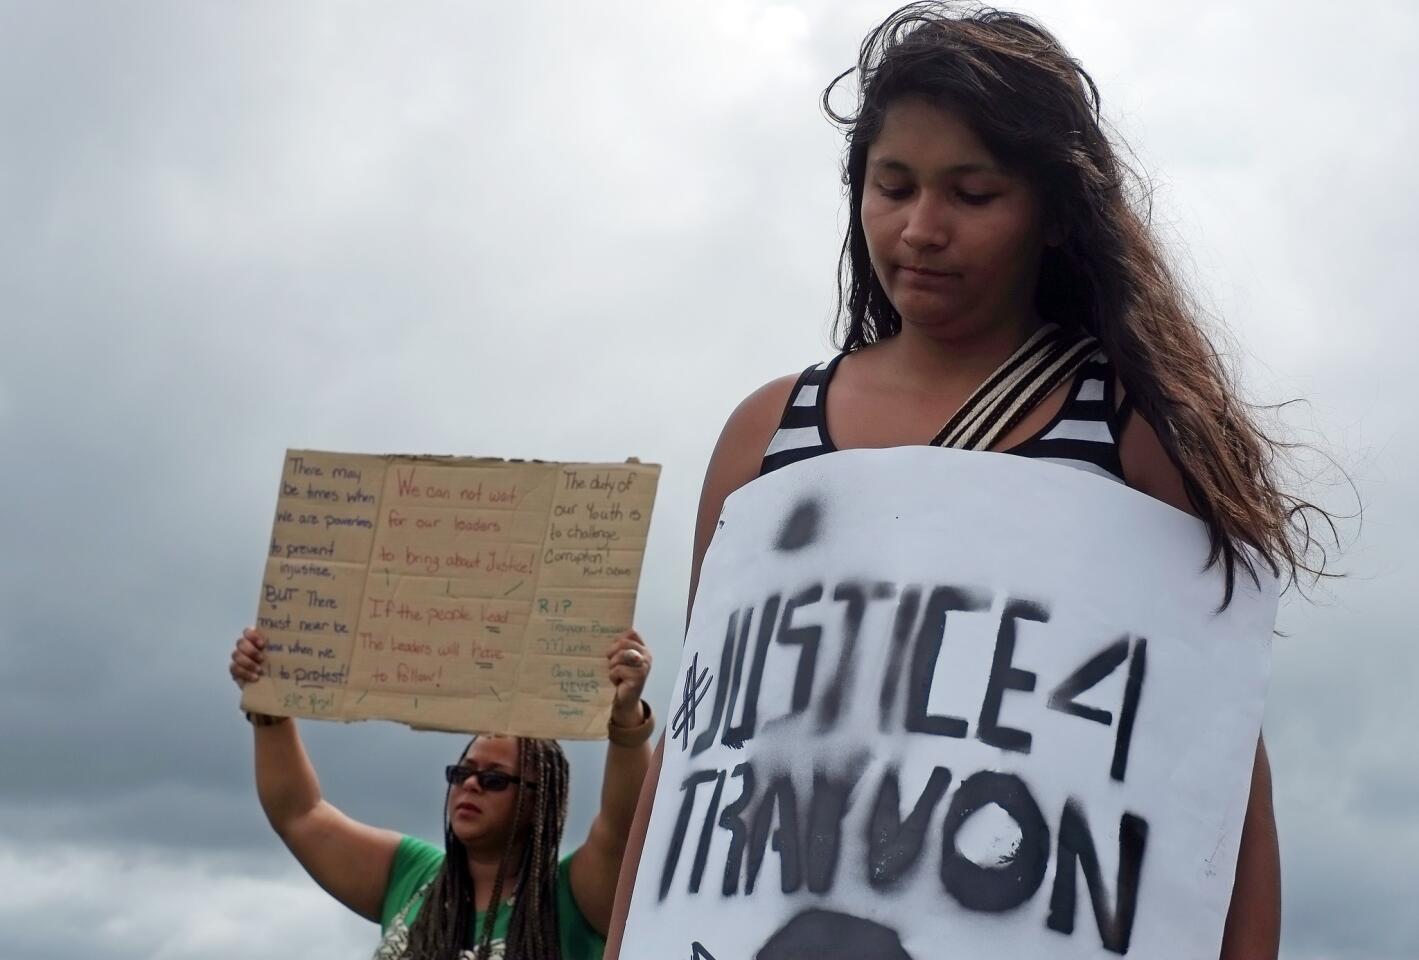 Kari Reay, left, and Estefania Galvis, right, stand with a small group of protesters along U.S. Highway 17-92 in Sanford in front of the courthouse on Sunday, July 14, 2013, the day after George Zimmerman was found not guilty of the murder of Trayvon Martin. (Jacob Langston/Orlando Sentinel)